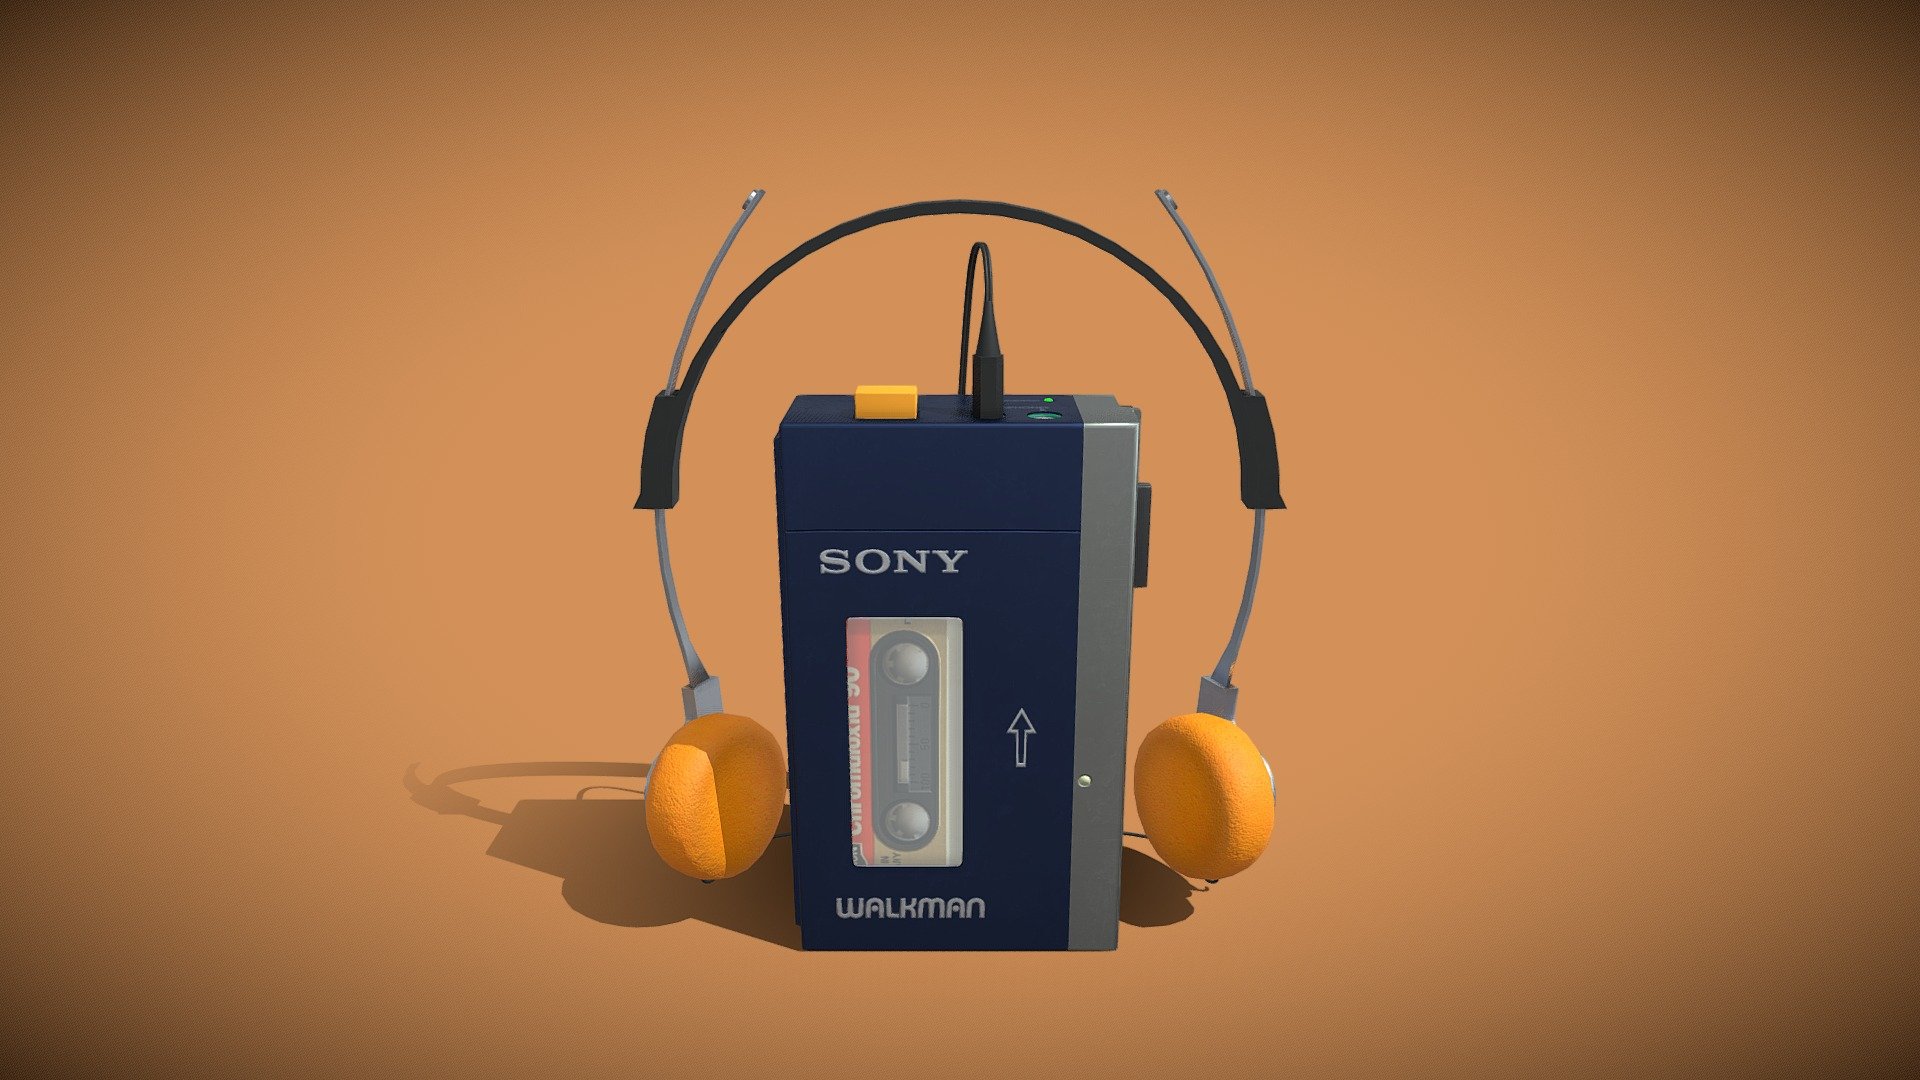 A slighty roughed up Sony Walkman from the 80s.

Collaboration with https://sketchfab.com/milkfromsaturn

Model: milkfromsaturn

Texture: Me - Sony Walkman - Download Free 3D model by julius.j.bib 3d model